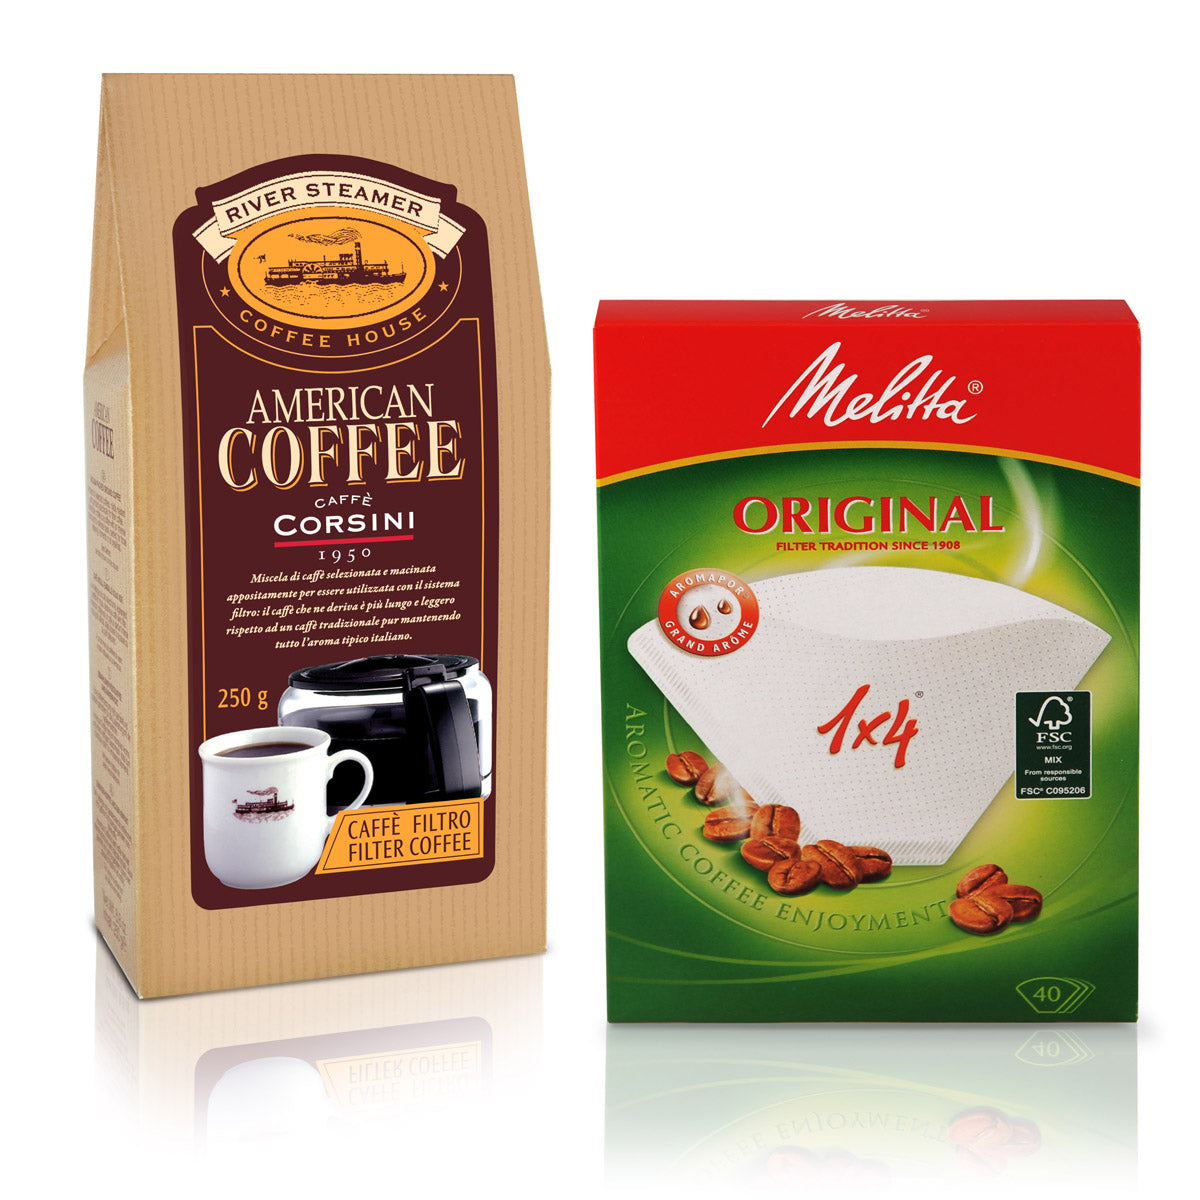 Ground coffee | American coffee and Melitta paper filters 1x4 cups